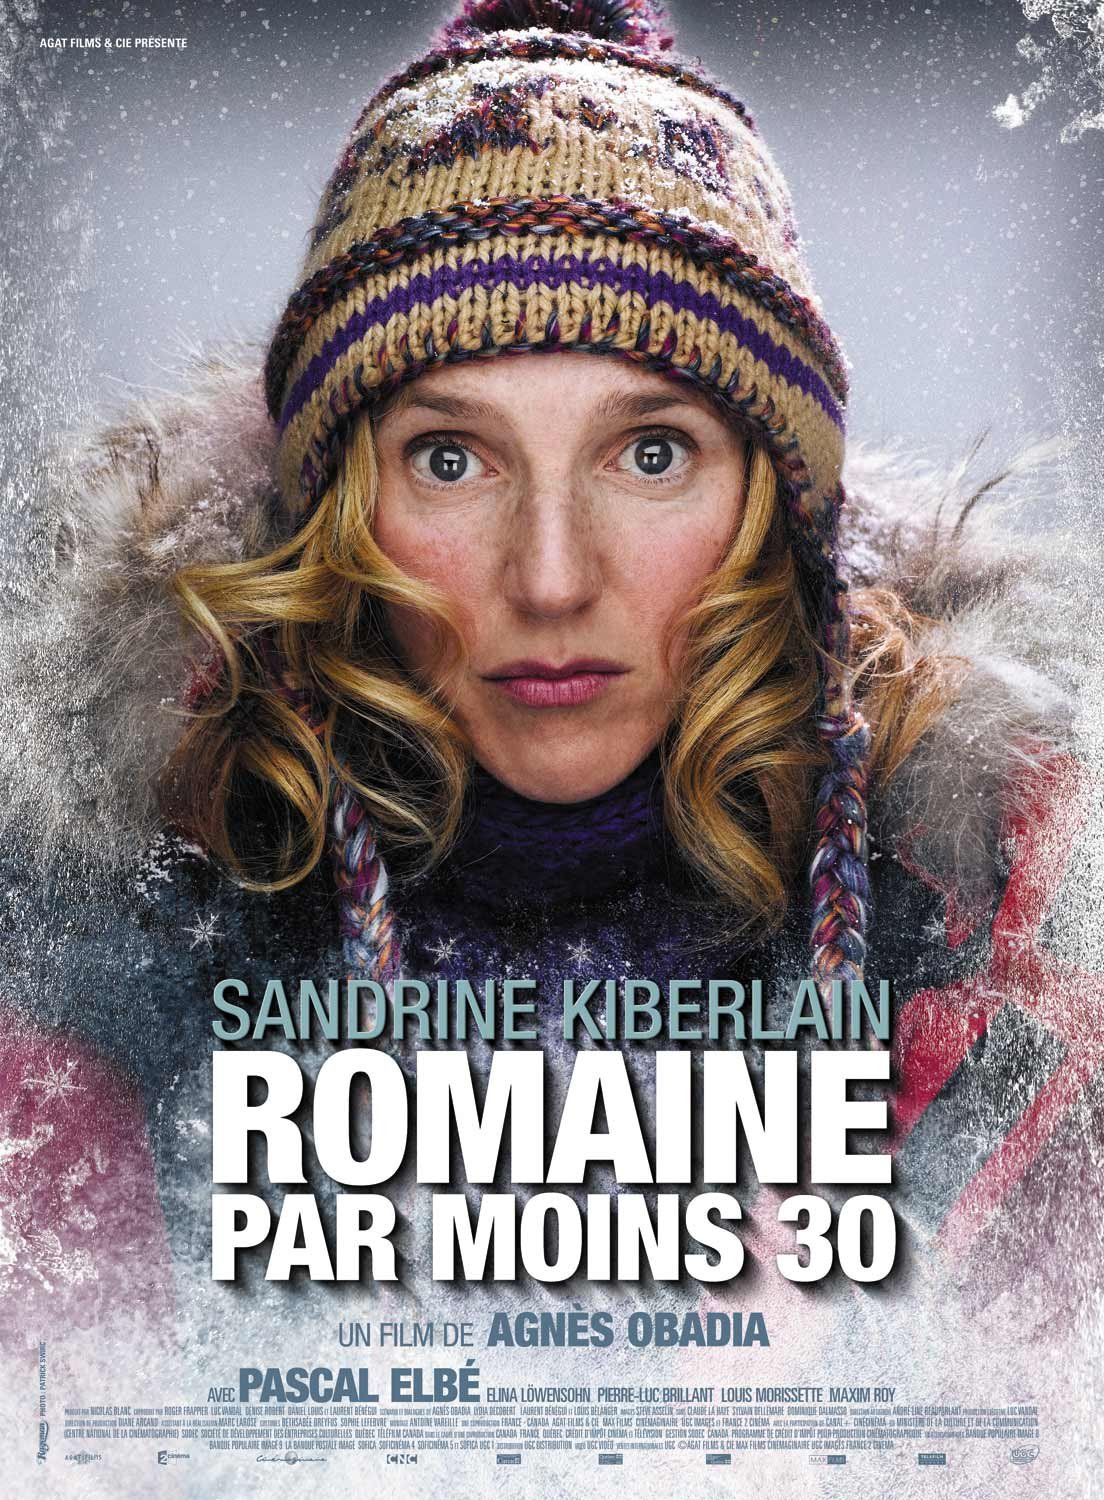 Extra Large Movie Poster Image for Romaine par moins 30 